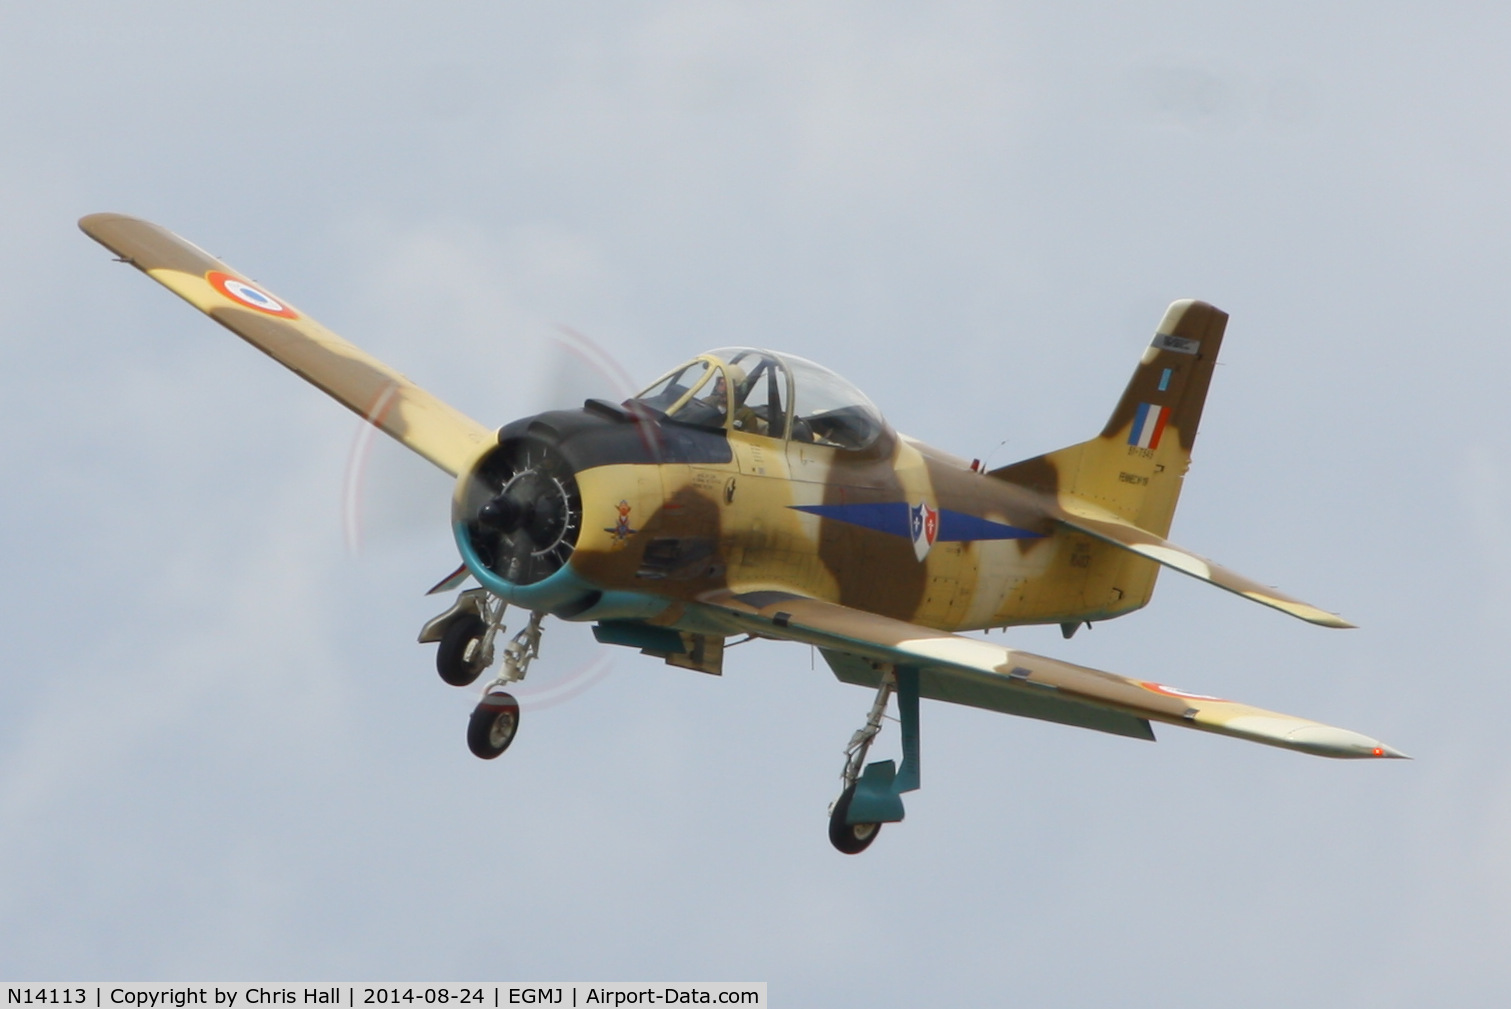 N14113, 1951 North American T-28A Fennec C/N 81-1, at the Little Gransden Airshow 2014